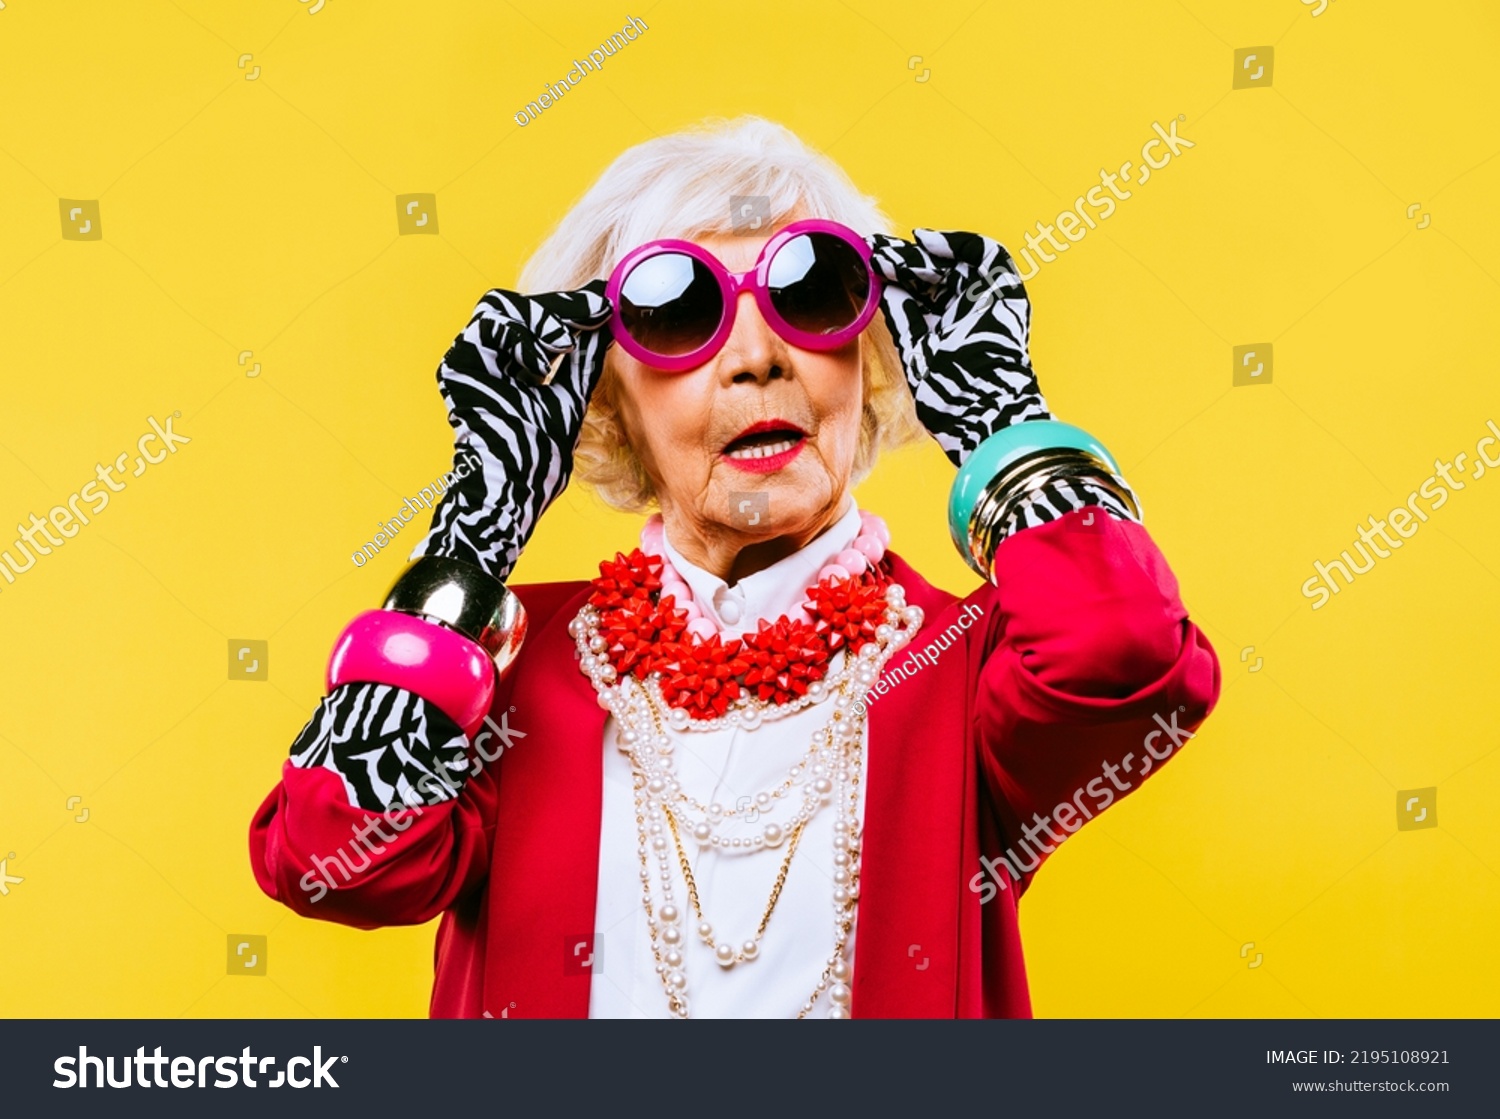 Happy and funny cool old lady with fashionable clothes portrait on colored background - Youthful grandmother with extravagant style, concepts about lifestyle, seniority and elderly people #2195108921